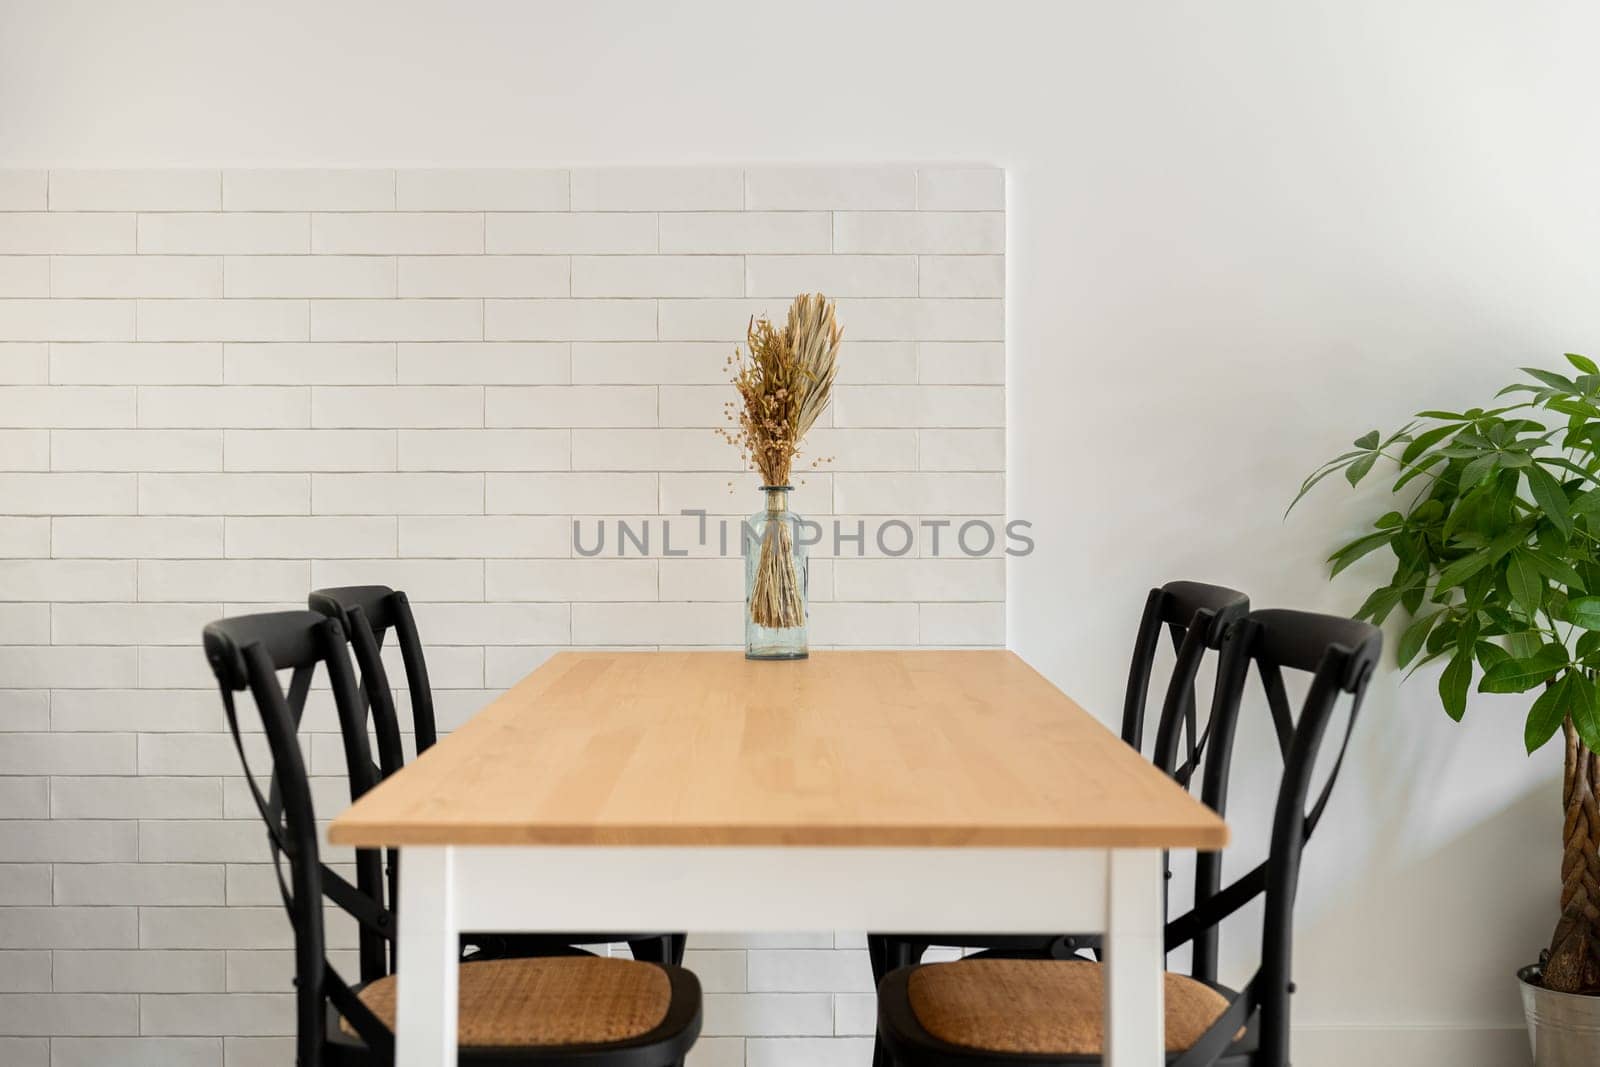 Wooden table with chairs and dry flowers bouquet in vase in dining room. Comfortable place to eat with modern furniture in domestic interior